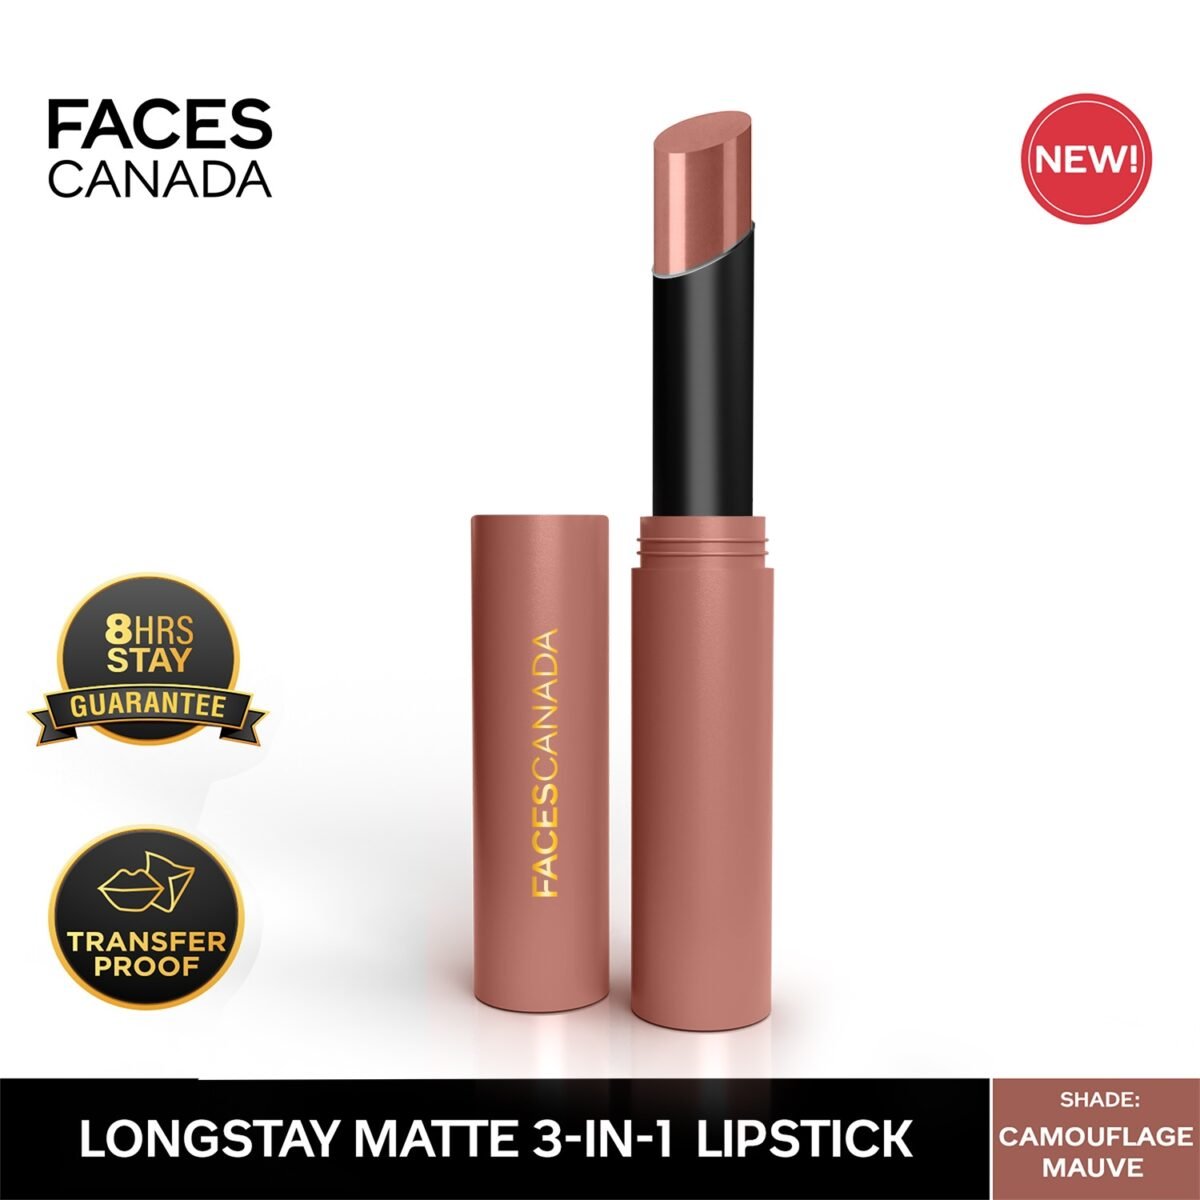 Faces Canada Long Stay Matte Lipstick, 07 Camouflage Mauve 2g